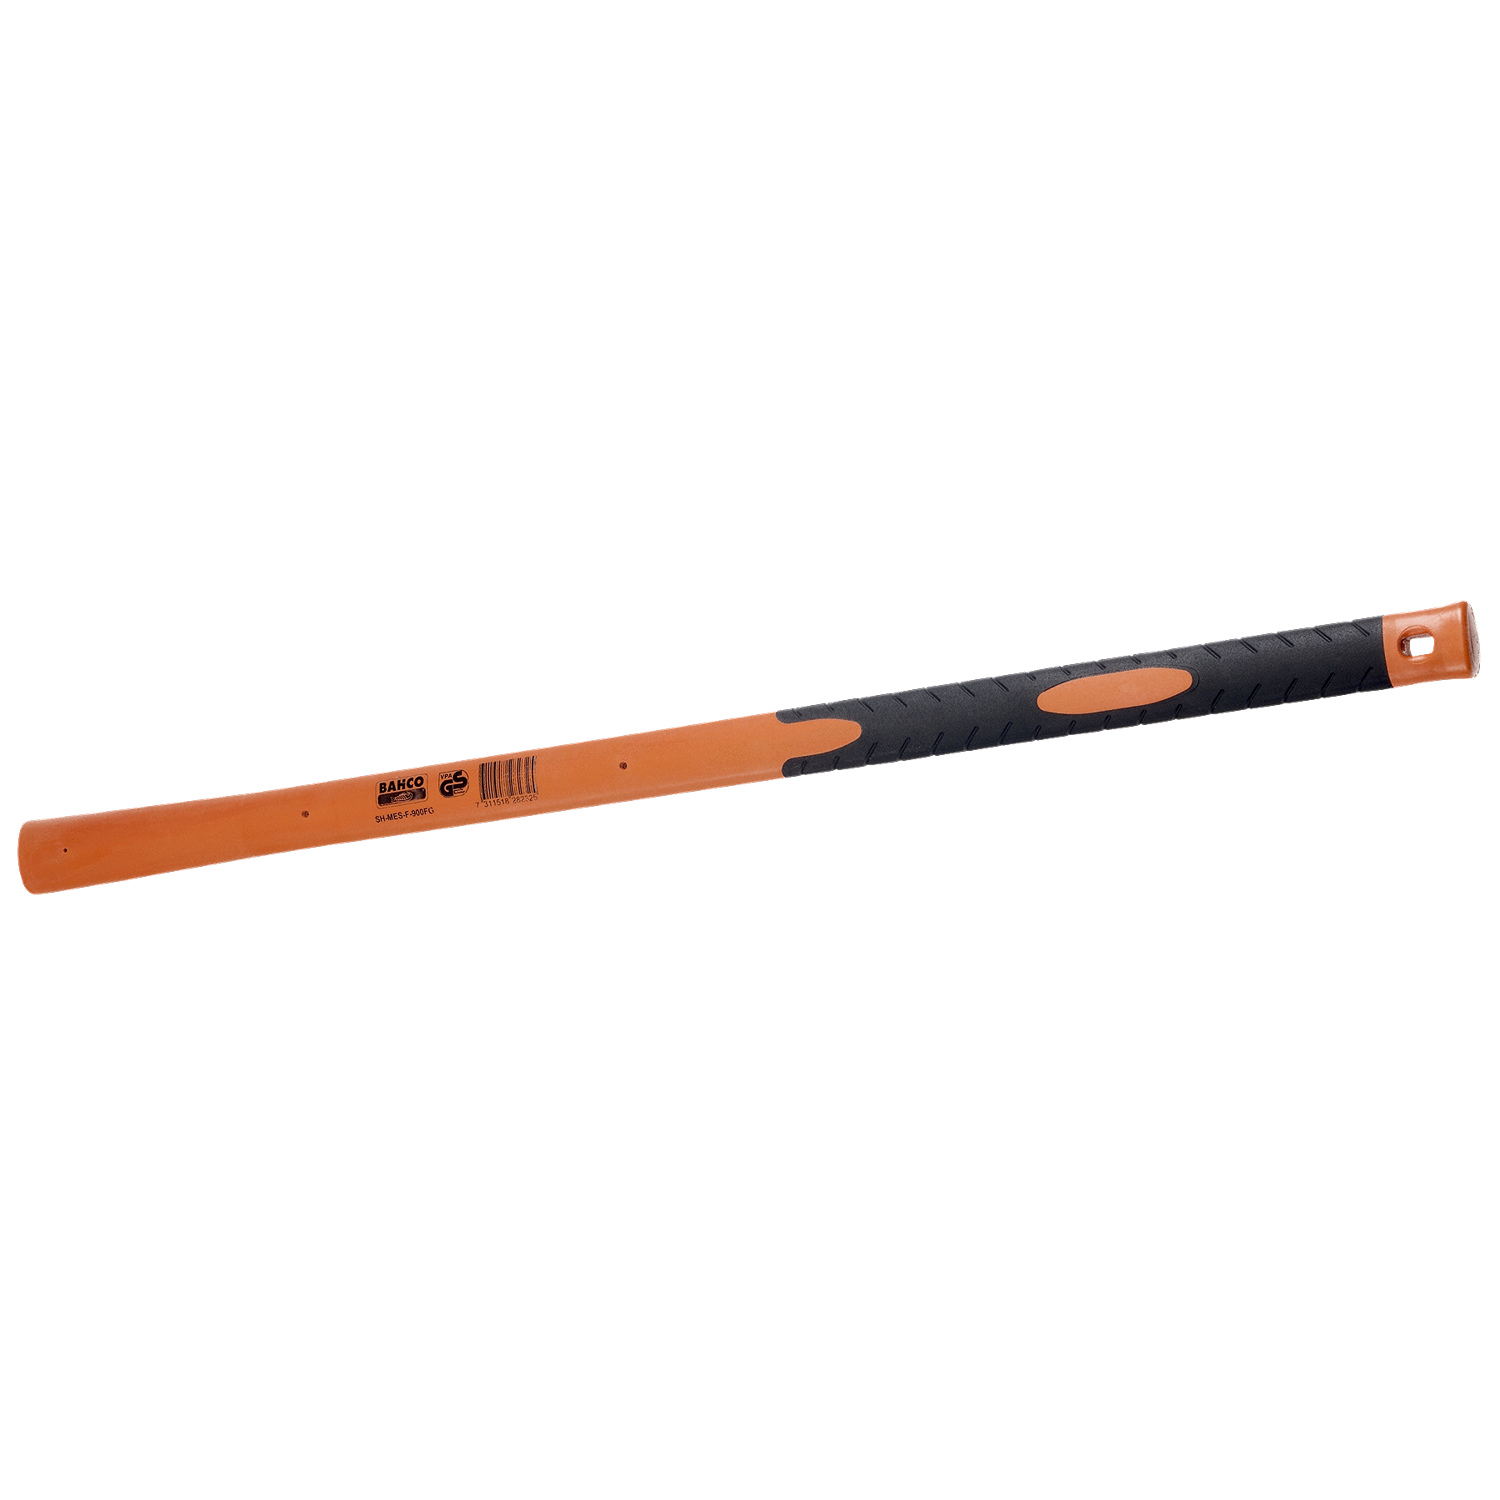 BAHCO SH-PAGS Ash Wooden Handle/Fibreglass Spare for Pick Axes - Premium Wooden Handle from BAHCO - Shop now at Yew Aik.